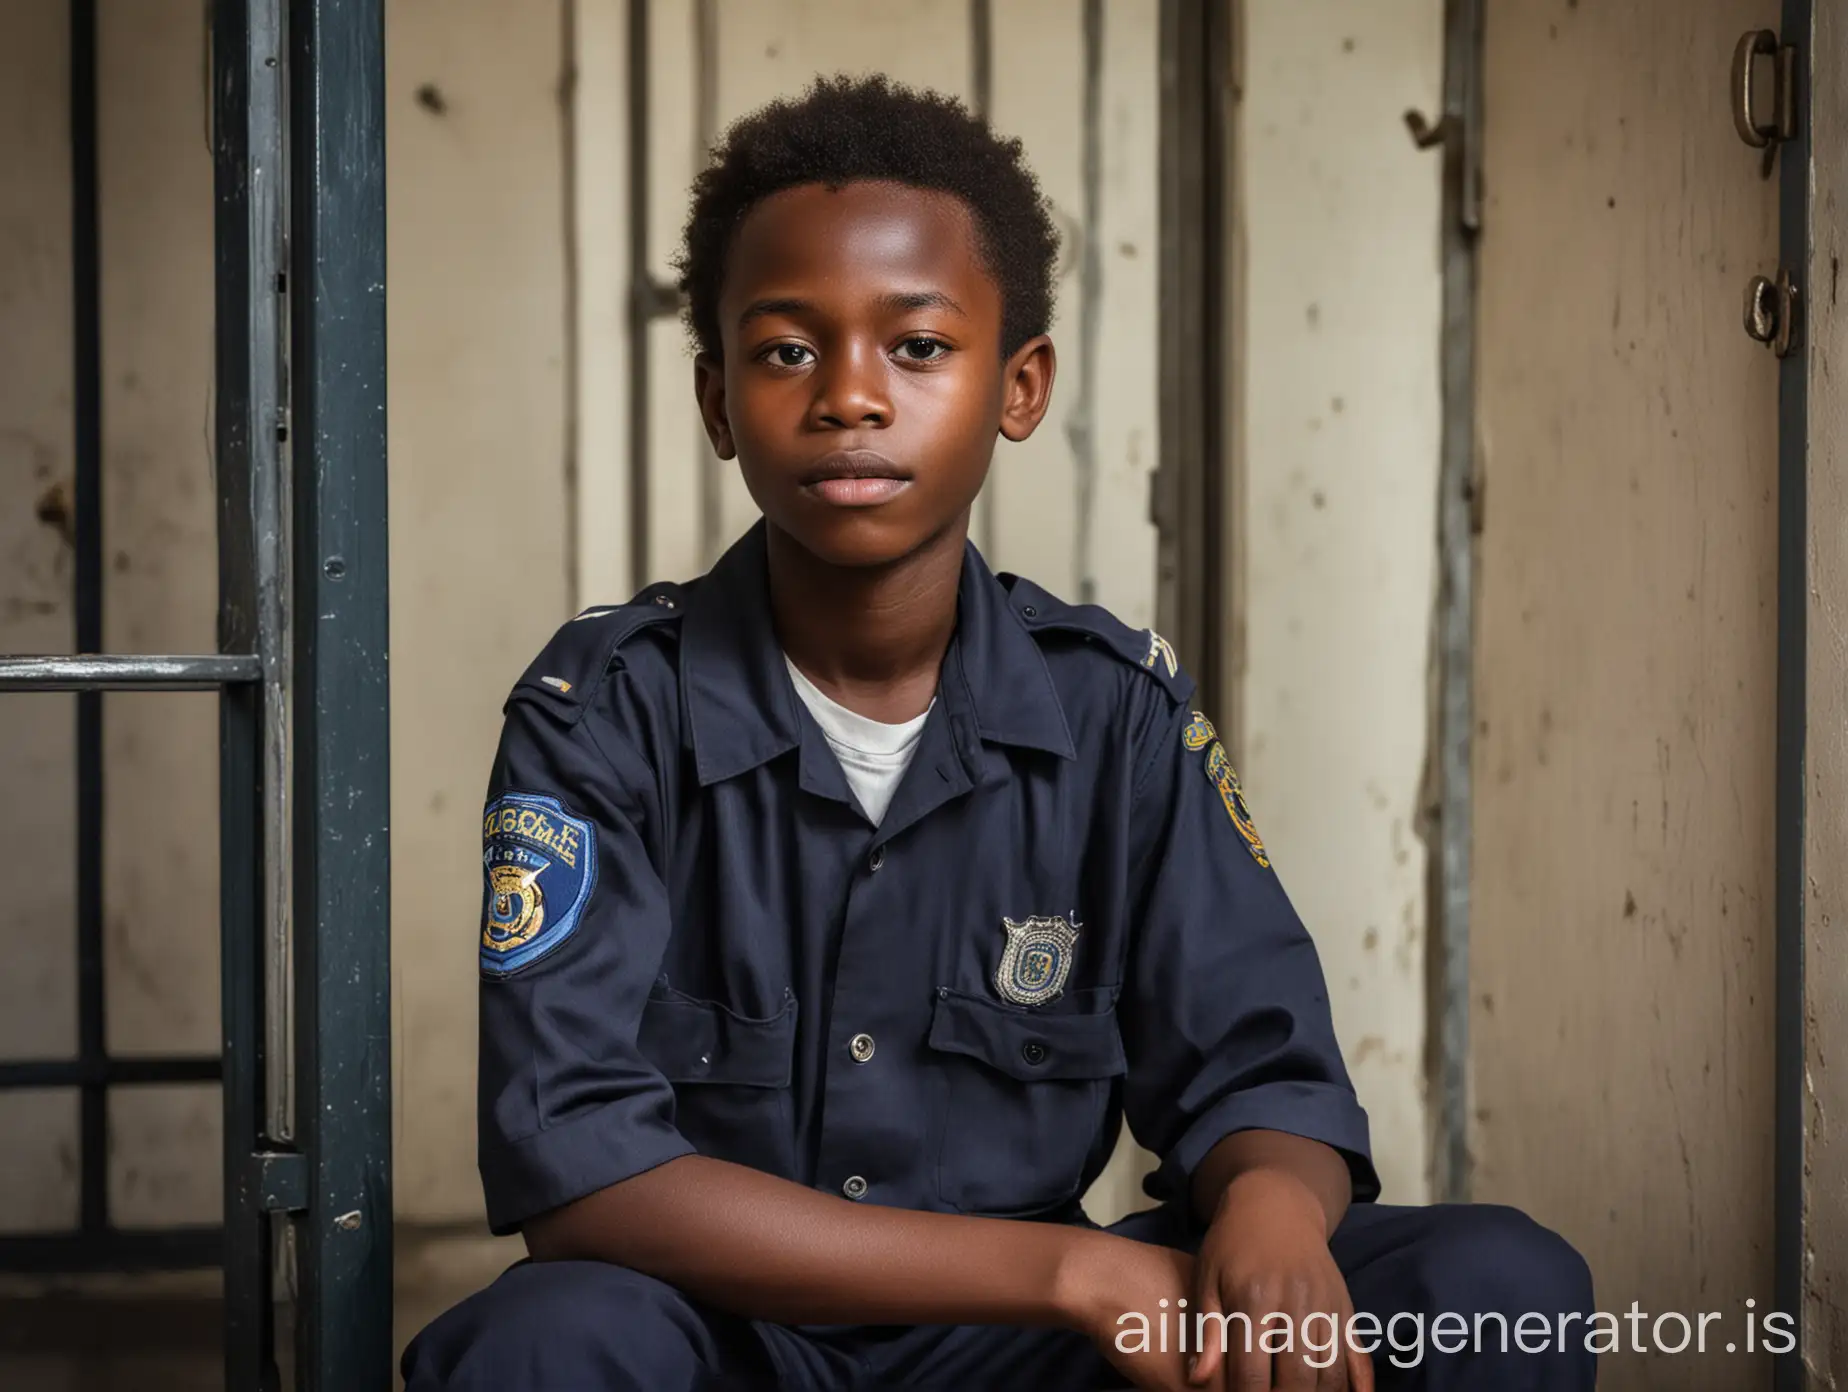 Young-African-Boy-15-Years-Sitting-Inside-Police-Station-Cell